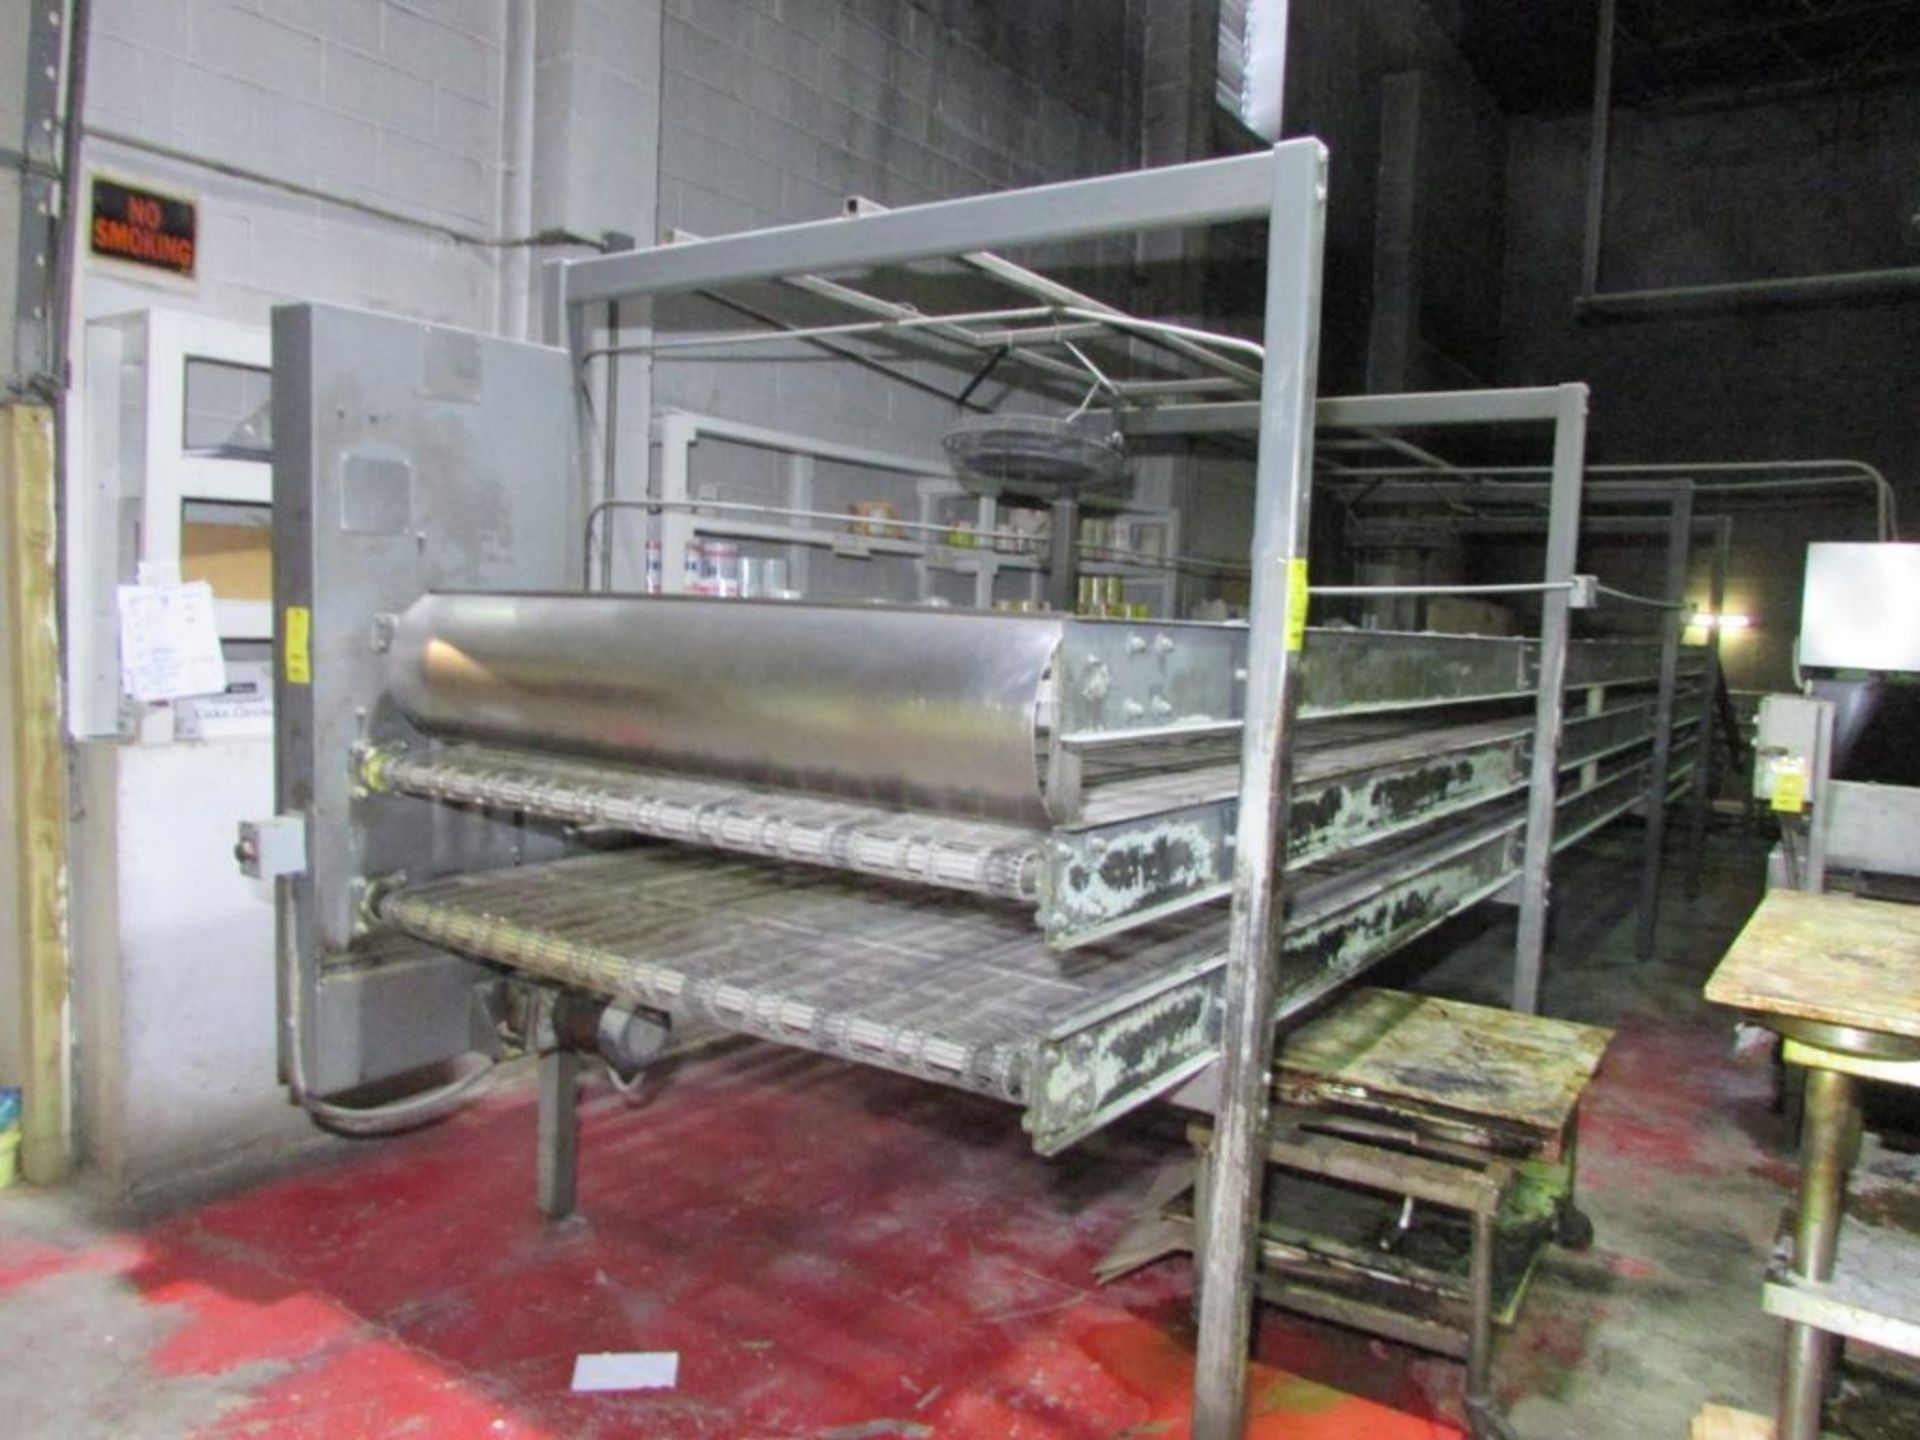 DOC Machine Works 3-Tier 64" W Cooling Conveyor System, Approx 95' Total Length (2) Half Moon Convey